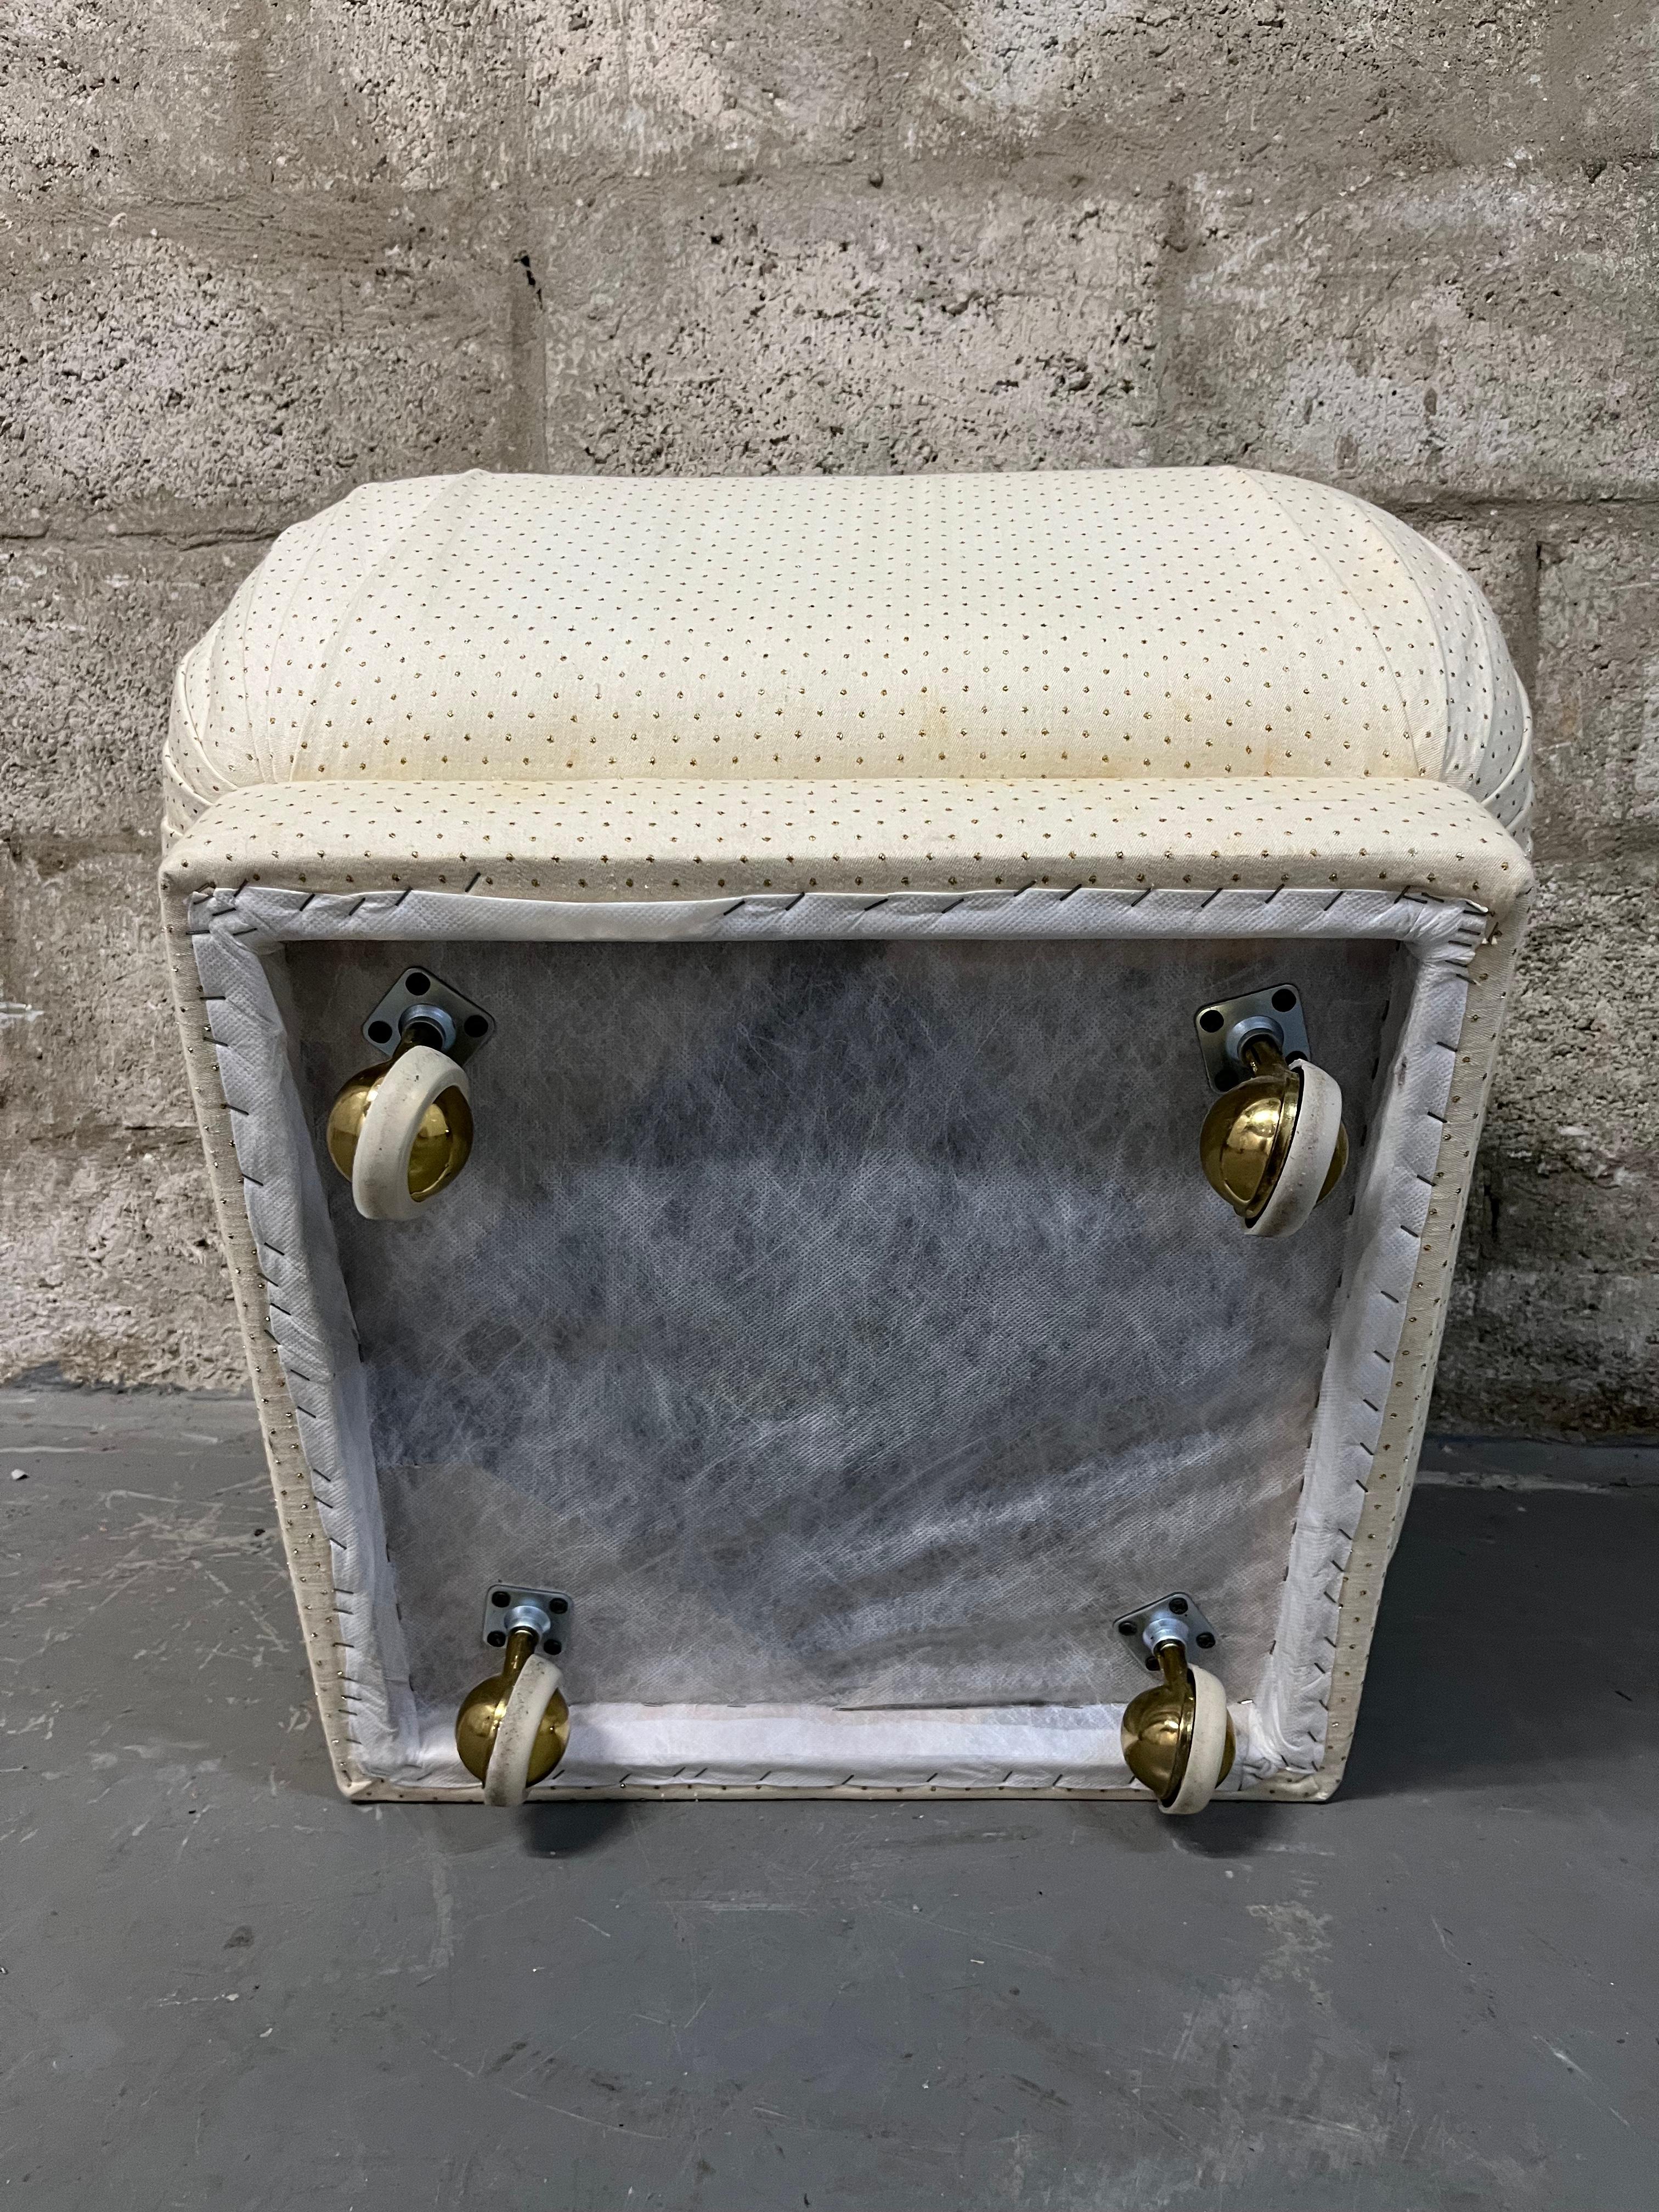 1980s Art Deco Revival Souffle Ottoman With Casters in the Karl Springer Style For Sale 6